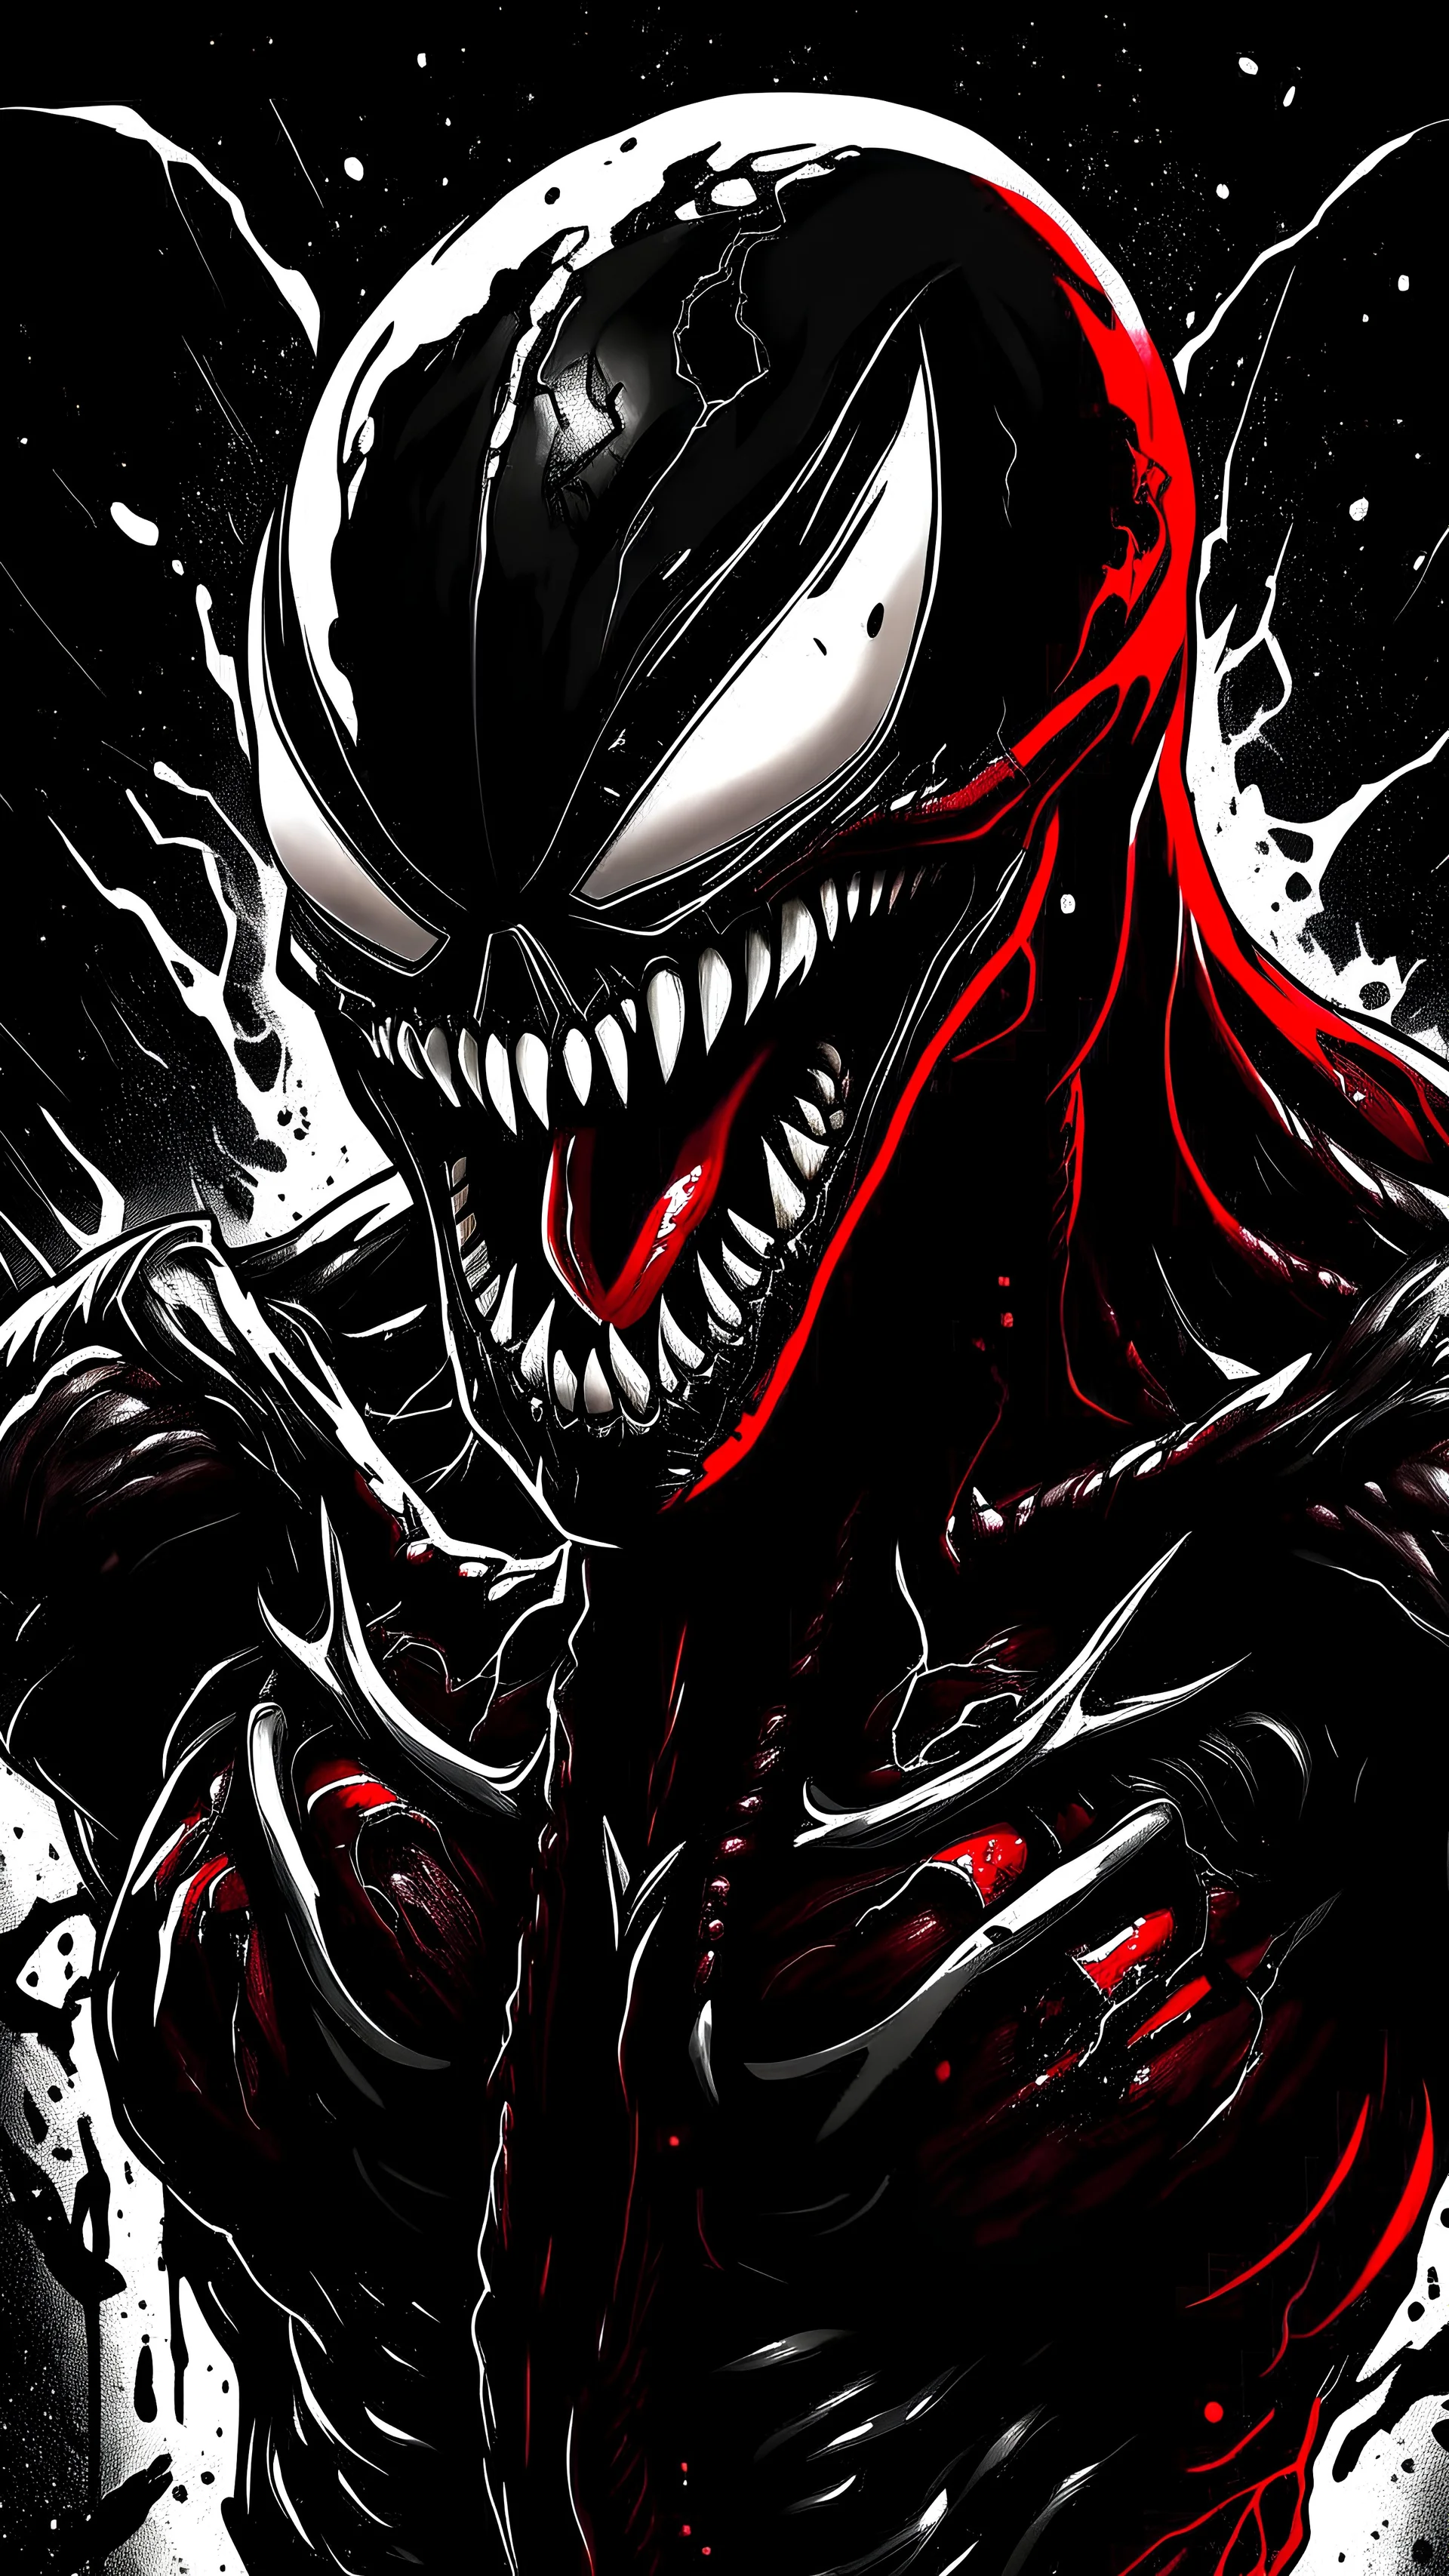 Black venom Symbiote version Batman,dominant symbiote character,mystical background,ultra detail, concept art,Lots of ink red splashes ,super detailed face, dynamic lighting, digital painting,highly detailed ,8k,